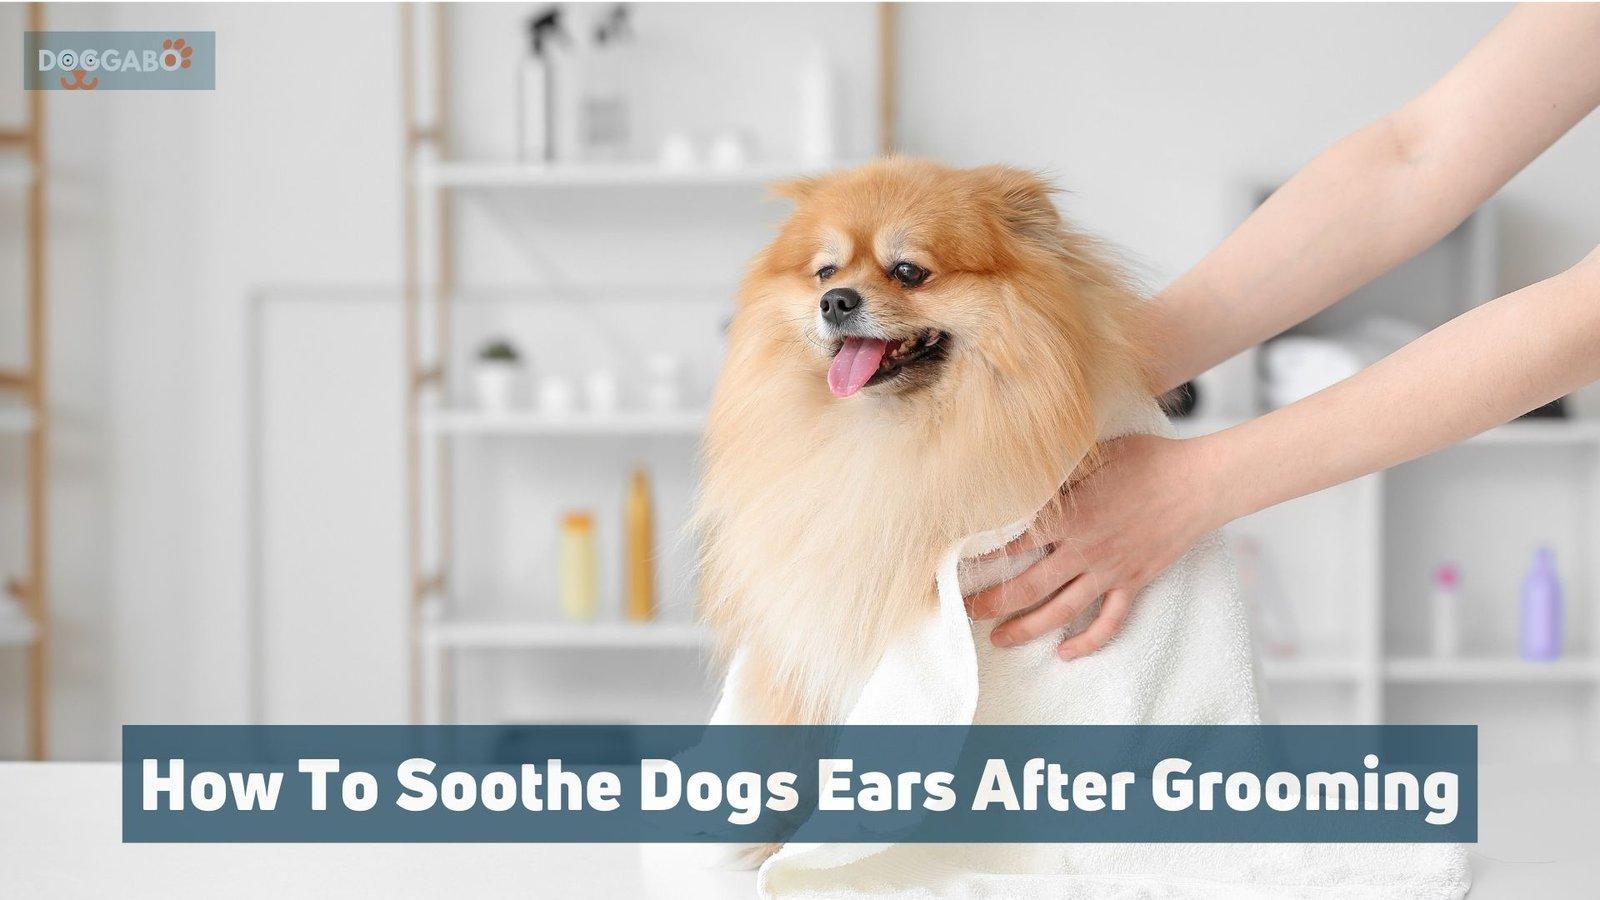 How To Soothe Dogs Ears After Grooming